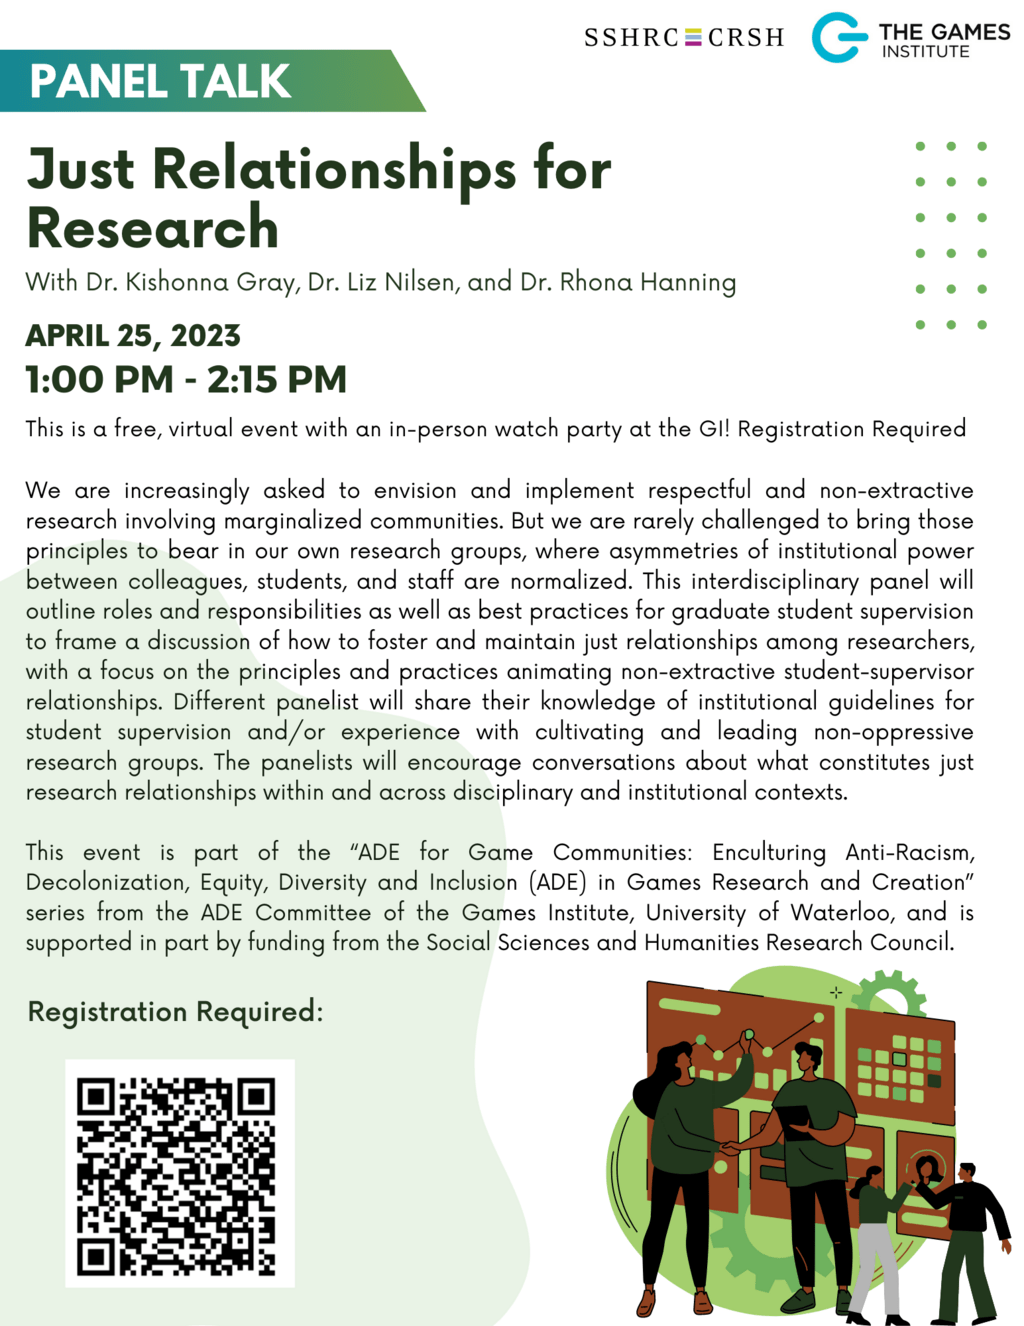 A promotional poster for "Just Relationships for Research Panel"